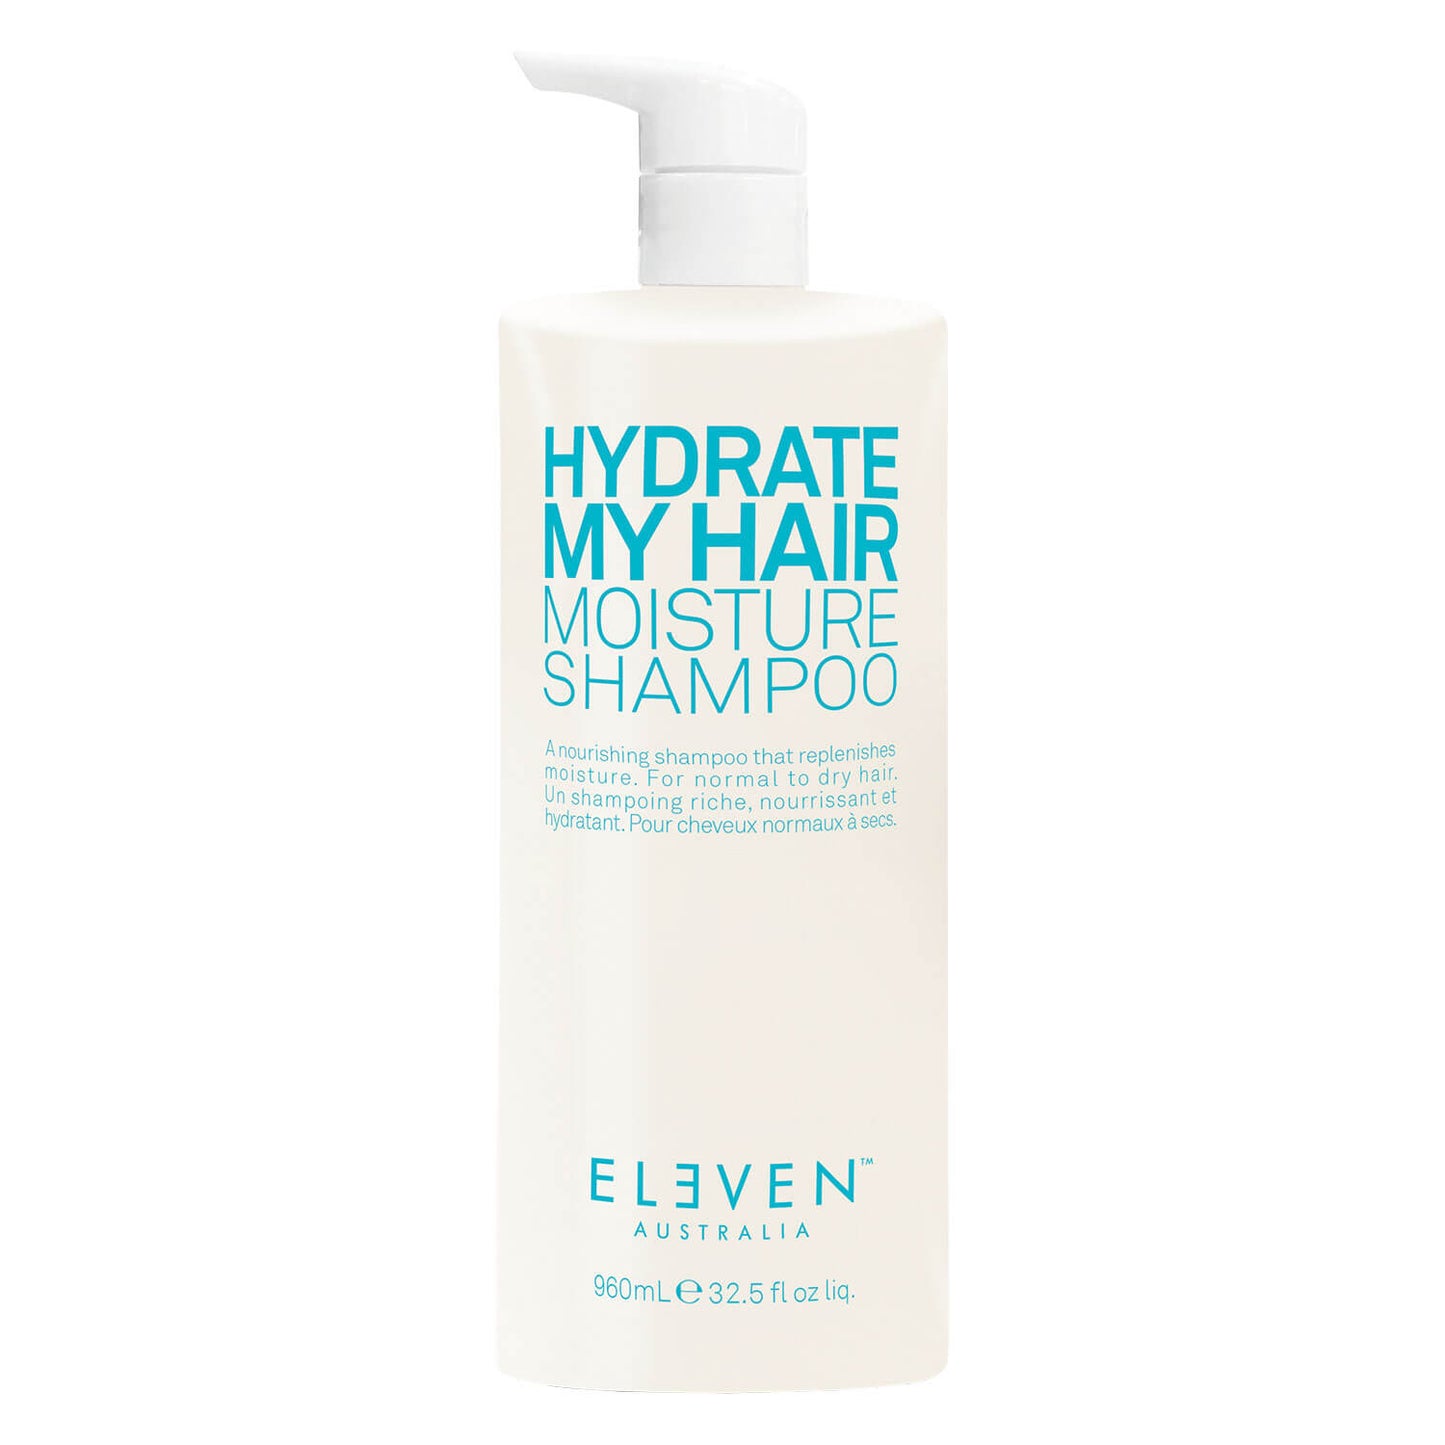 HYDRATE MY HAIR MOSITURE SHAMPOO